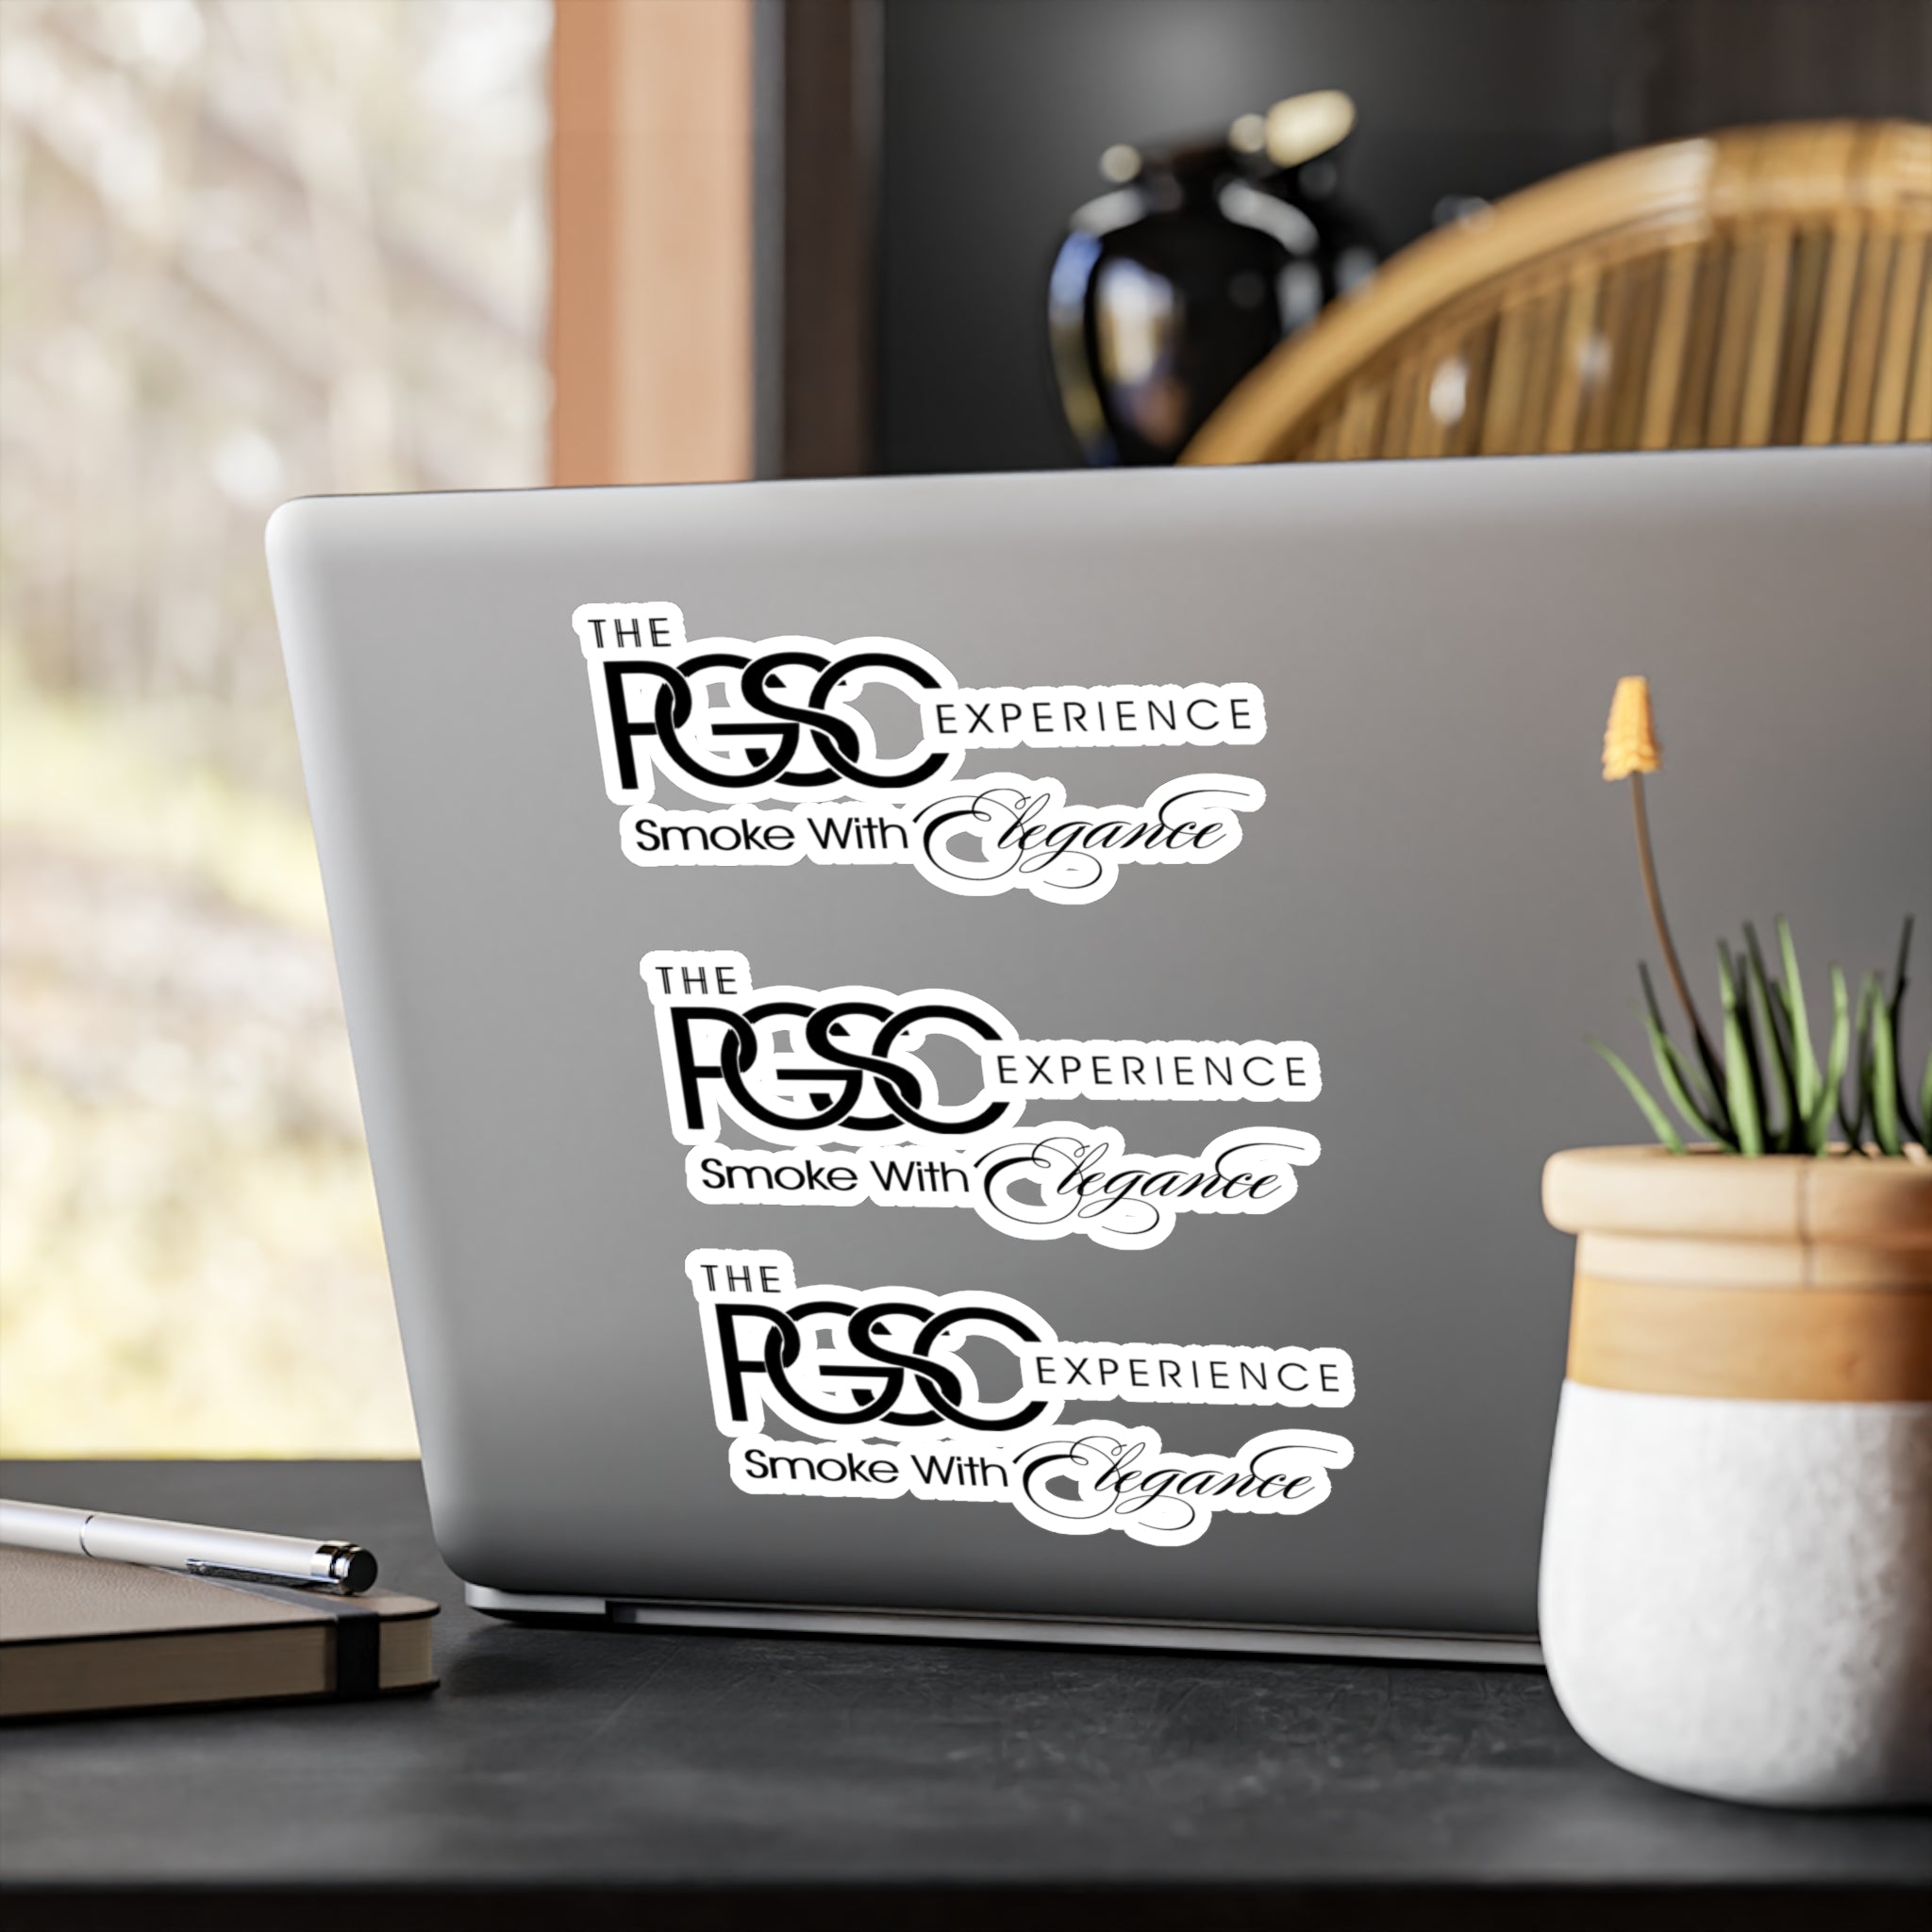 The PGSC Experience Vinyl Decals